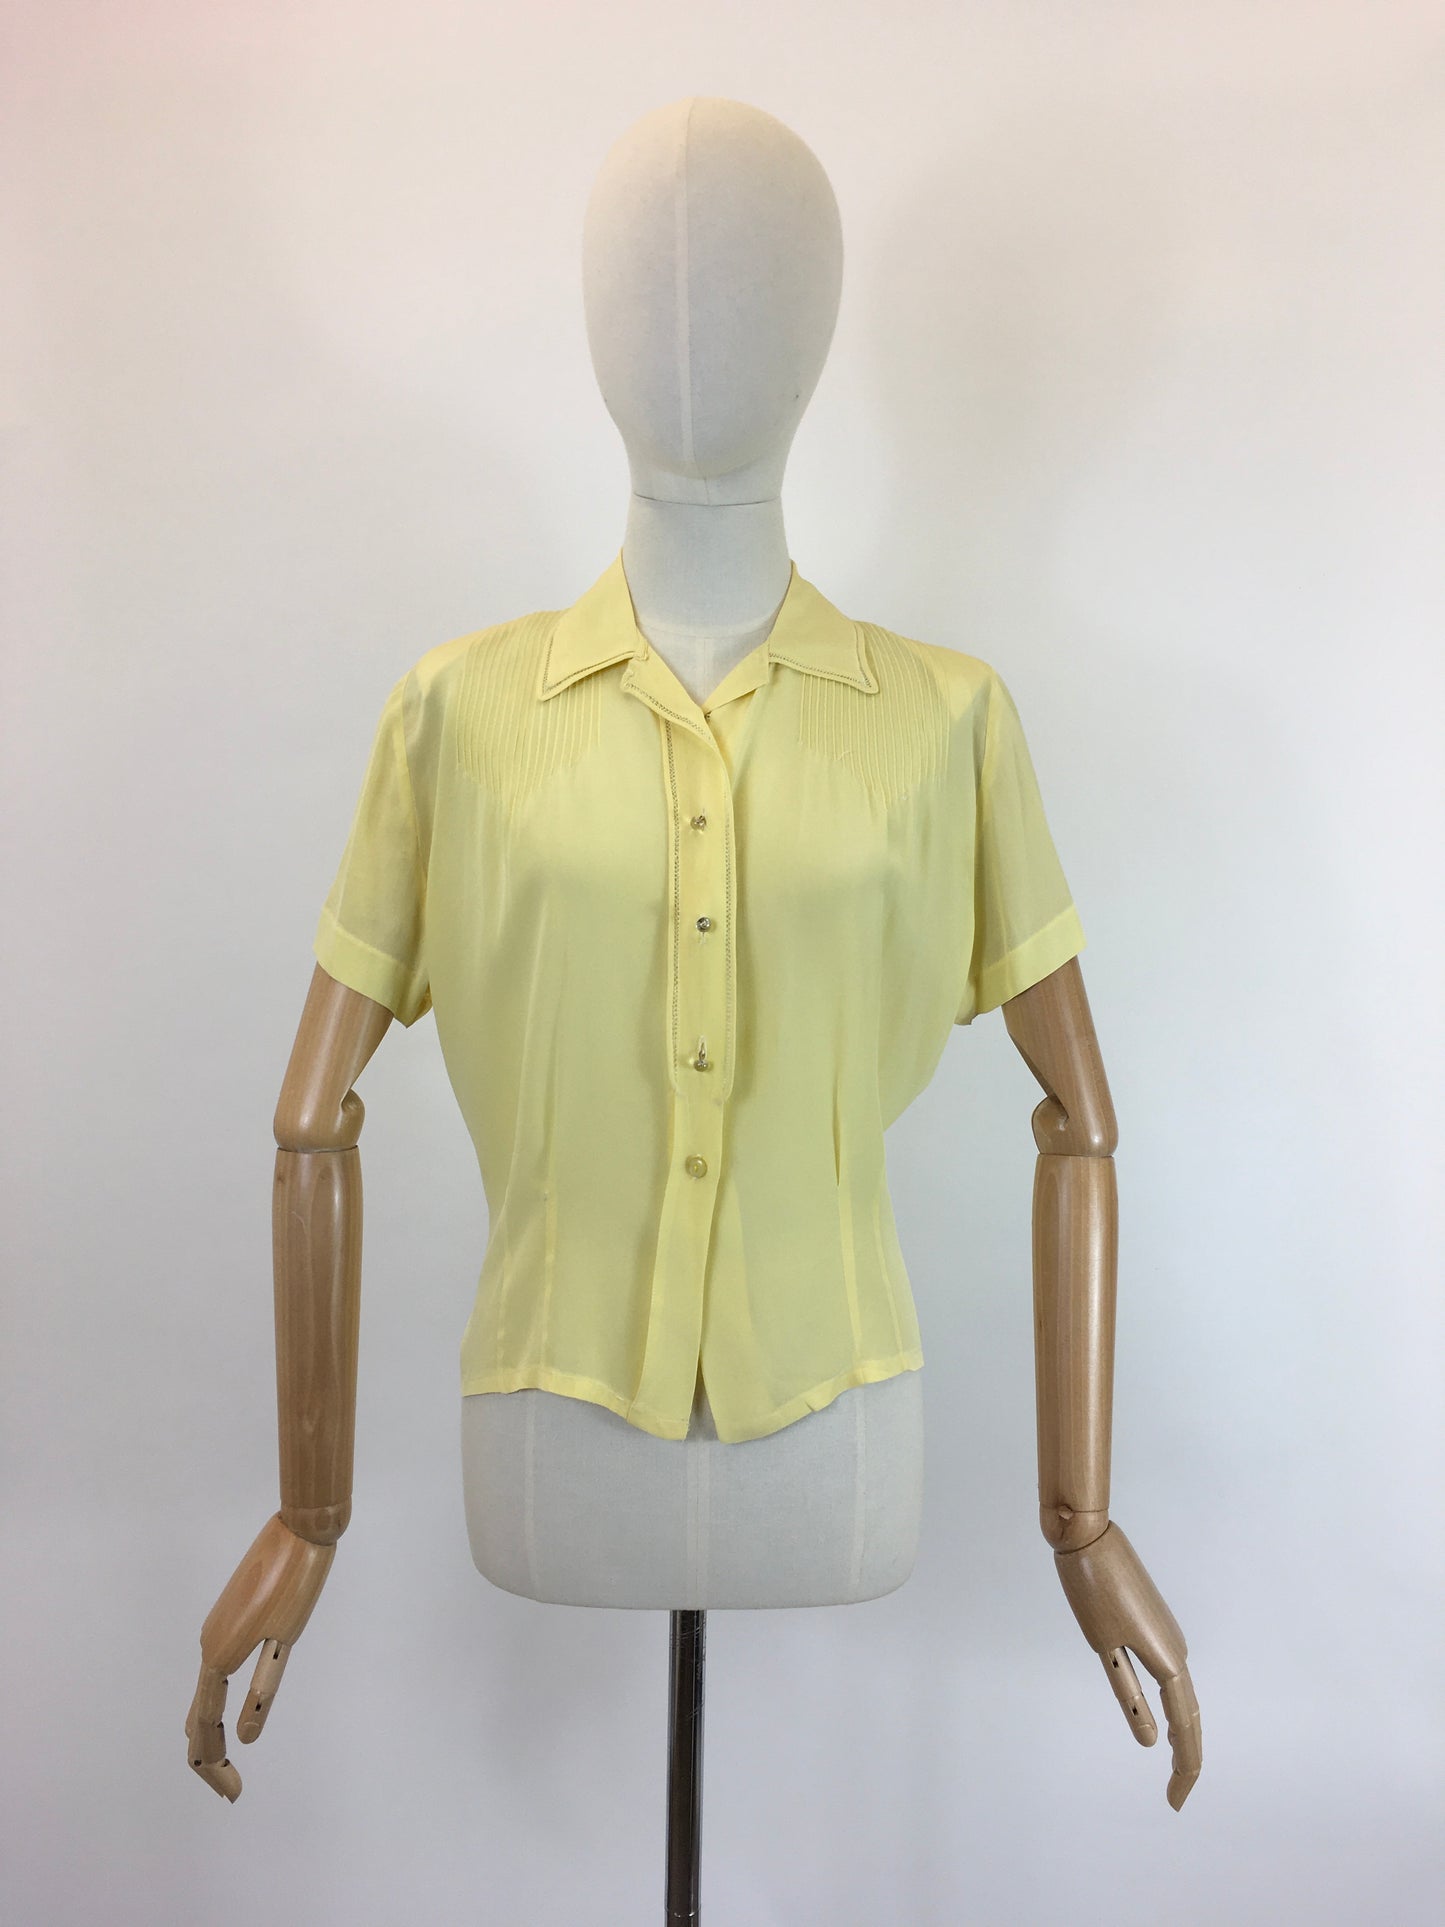 Original 1940’s Sheer Blouse In A Sunshine Yellow - With Stunning Stitch Work Detailing